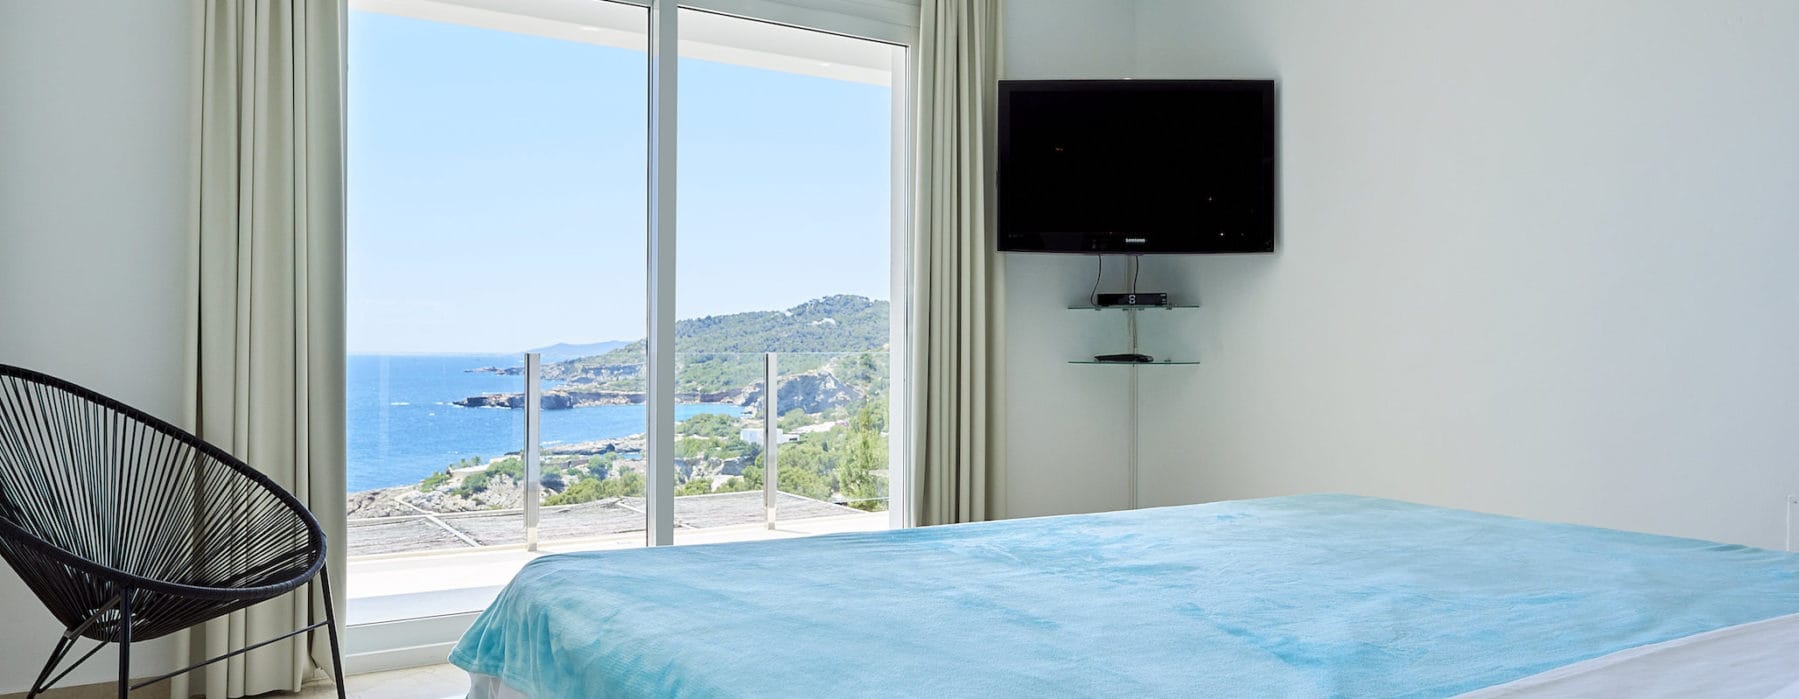 Double bedroom with stunning sea view through door window and glass front terrace